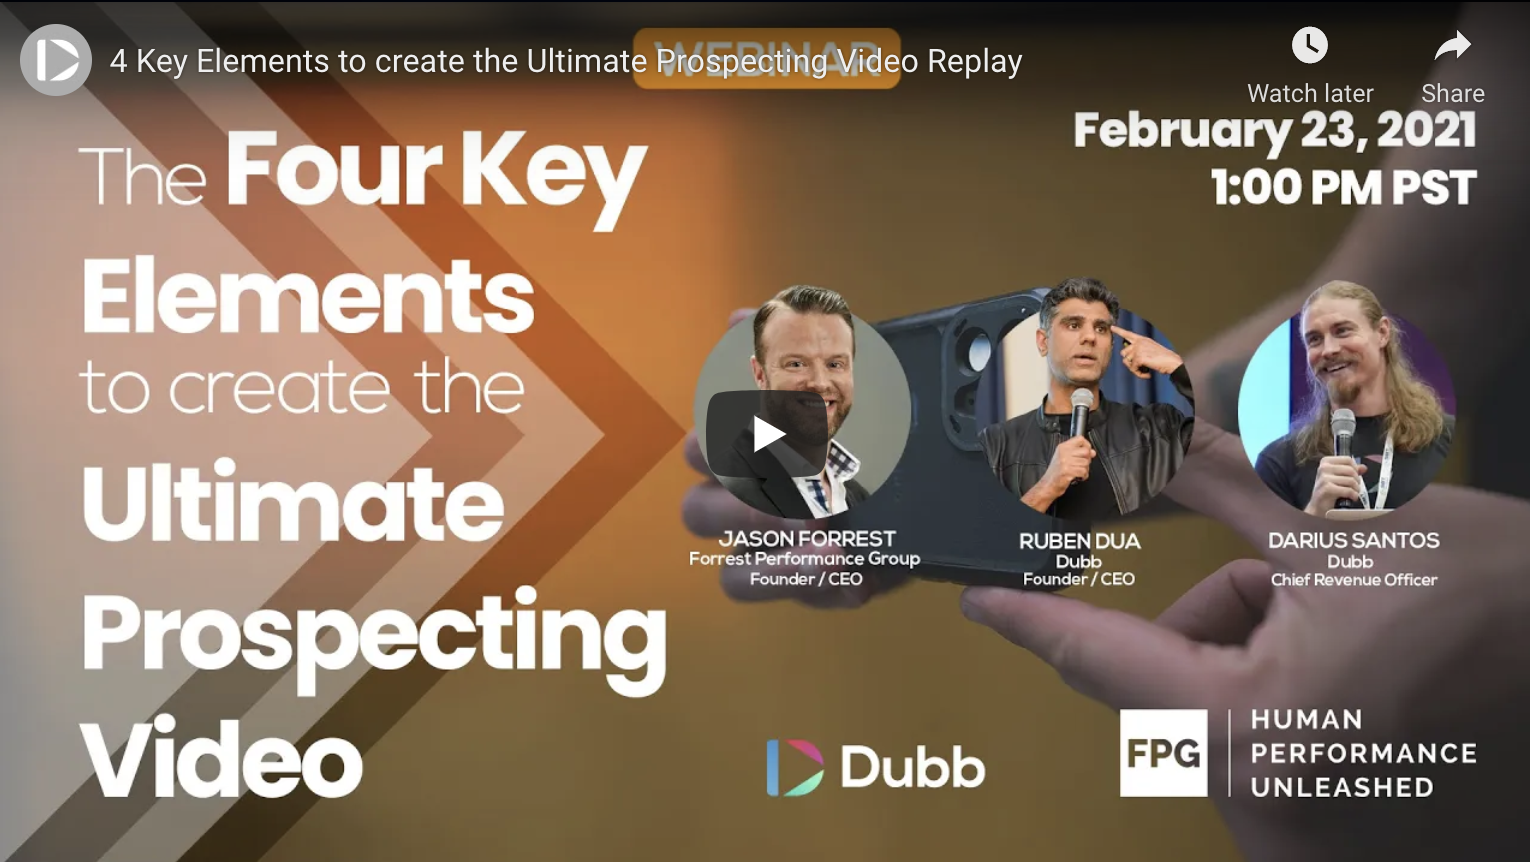 The Four Key Elements to Create the Ultimate Prospecting Video